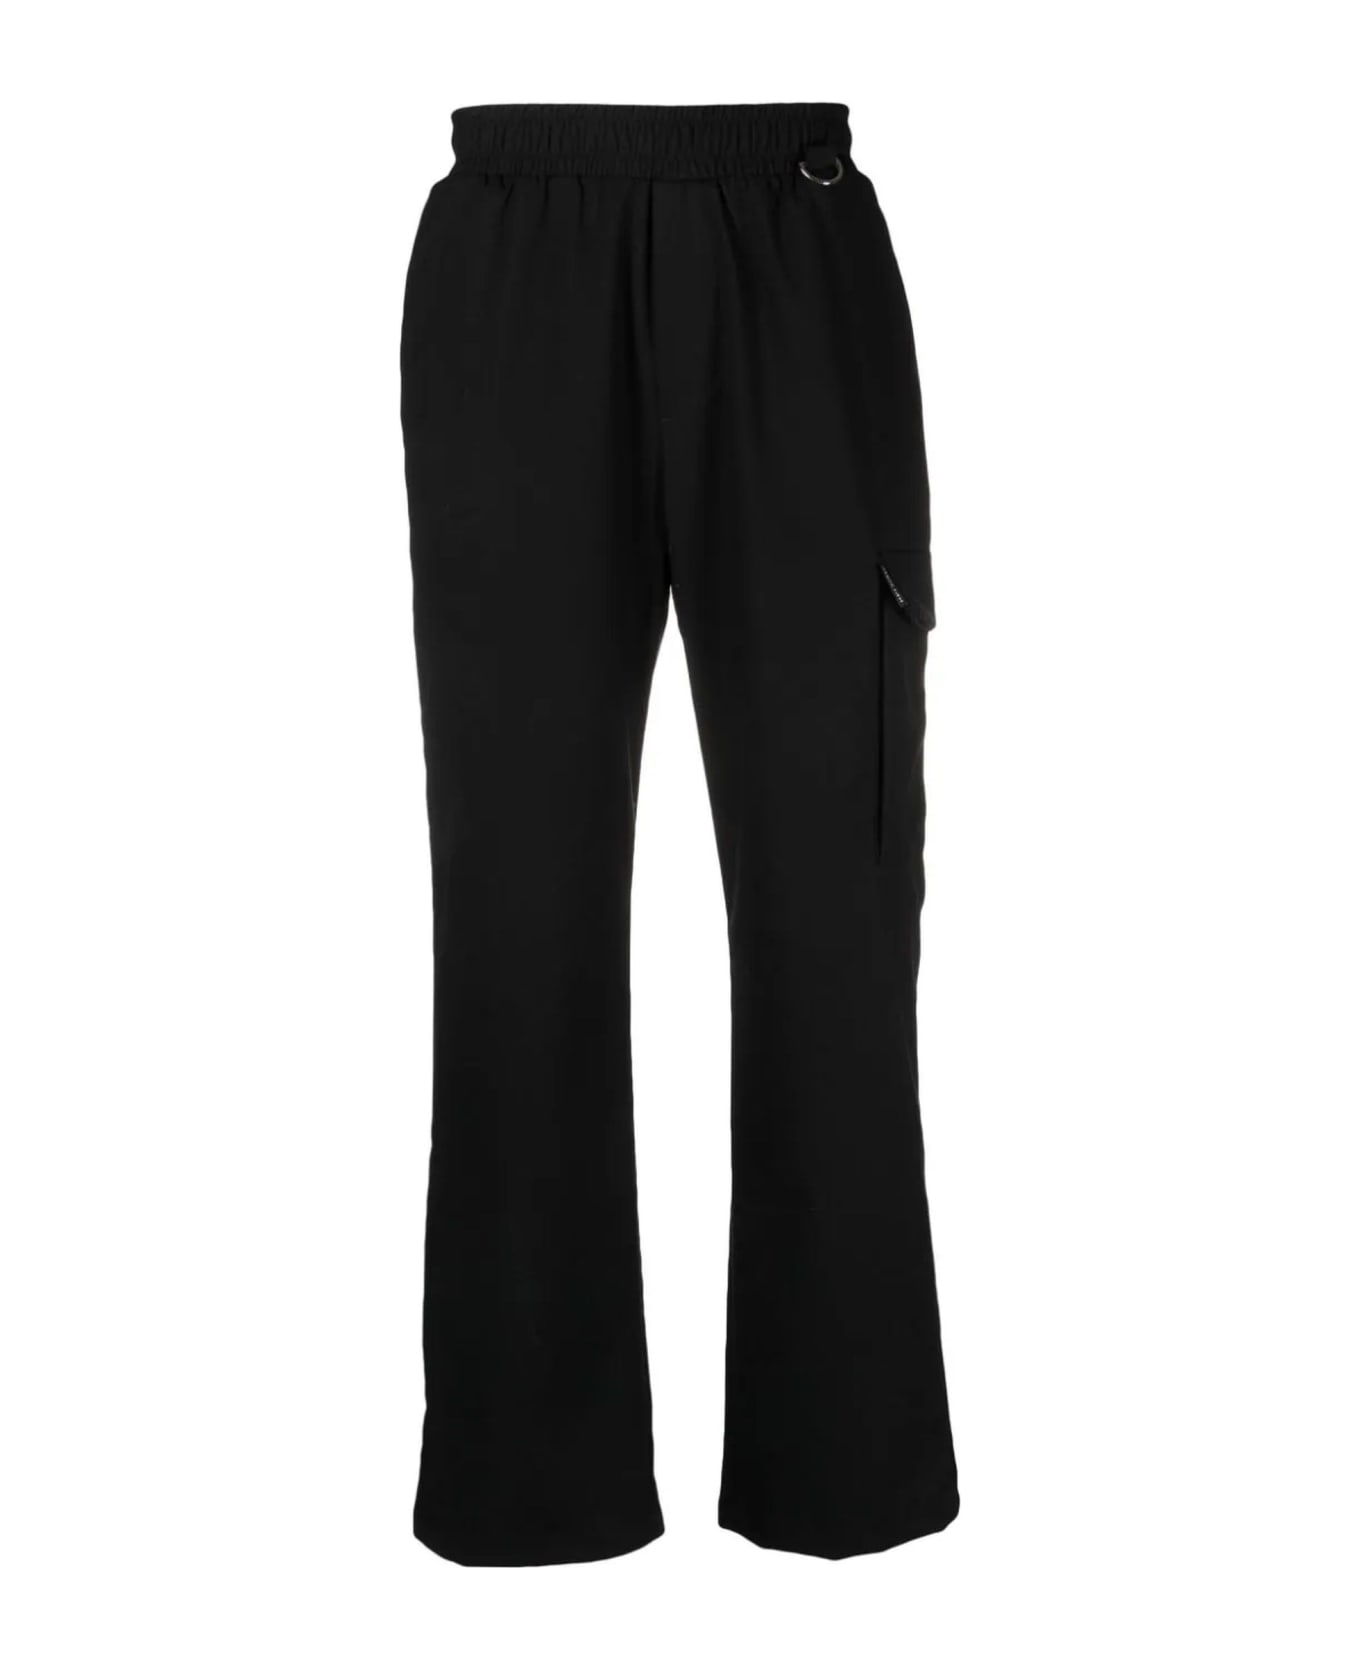 Family First Milano Black Wool Blend Trousers - BLACK